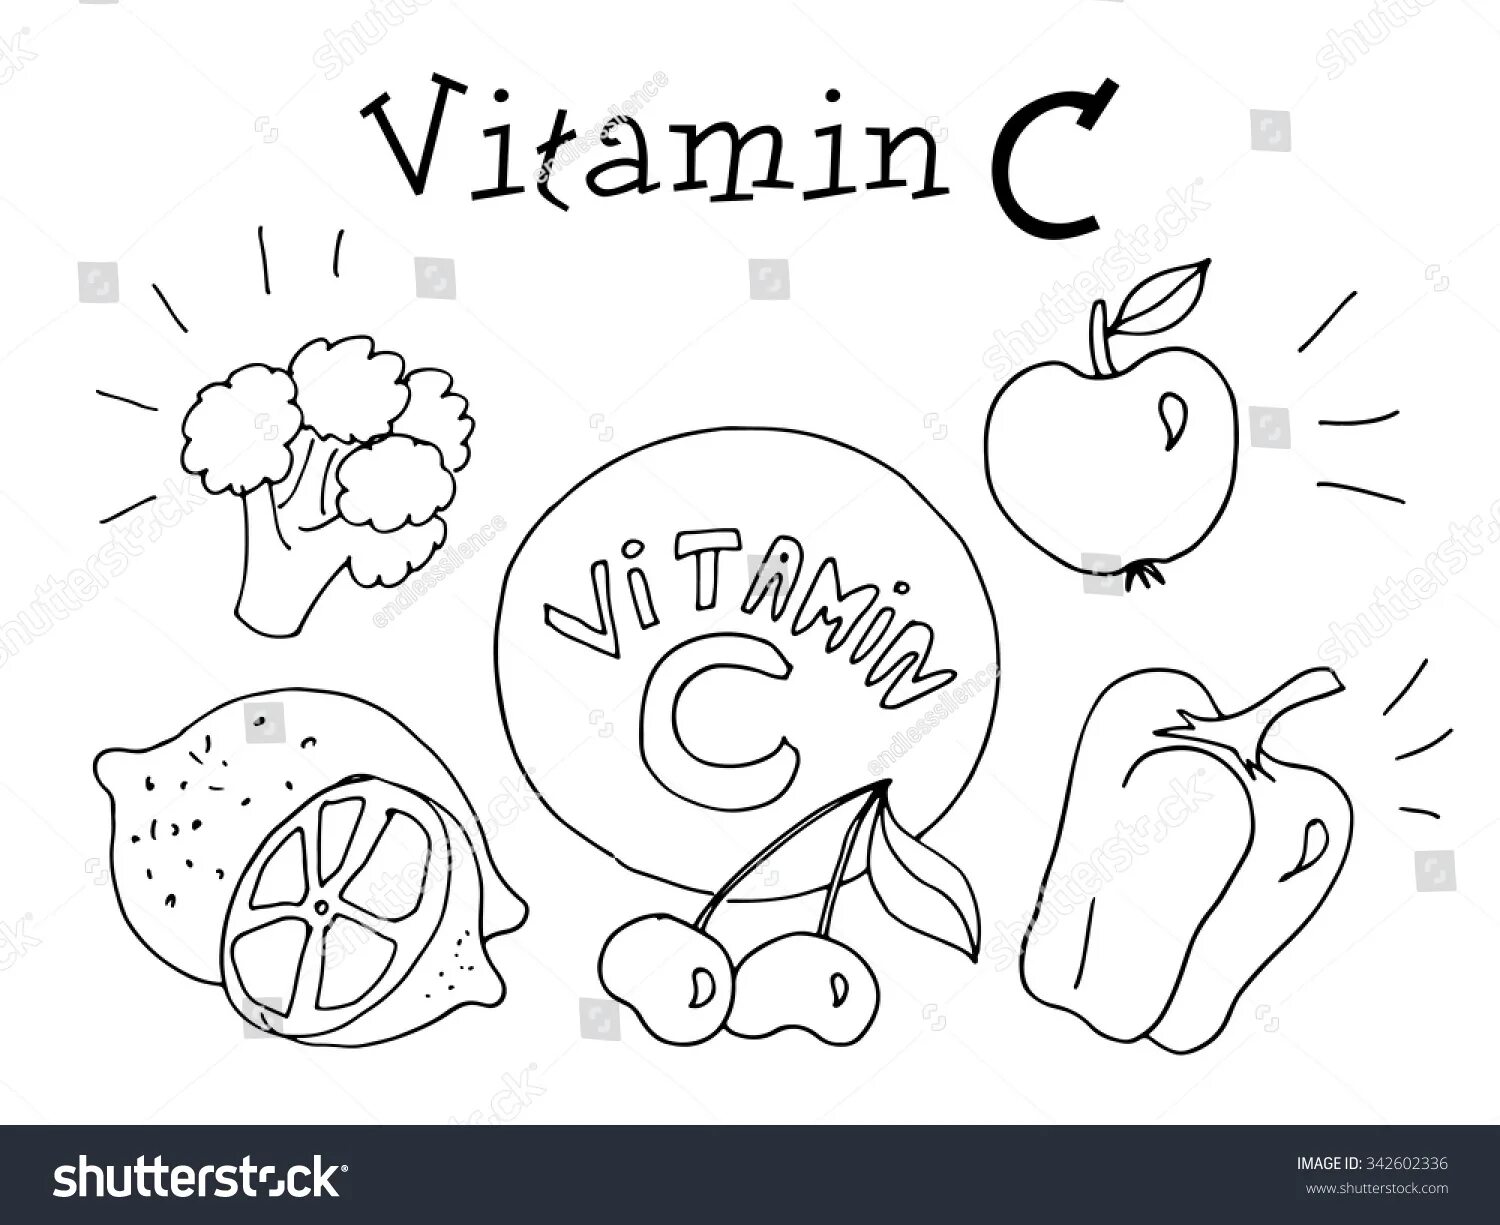 Vitamins for children in fruits and vegetables #12